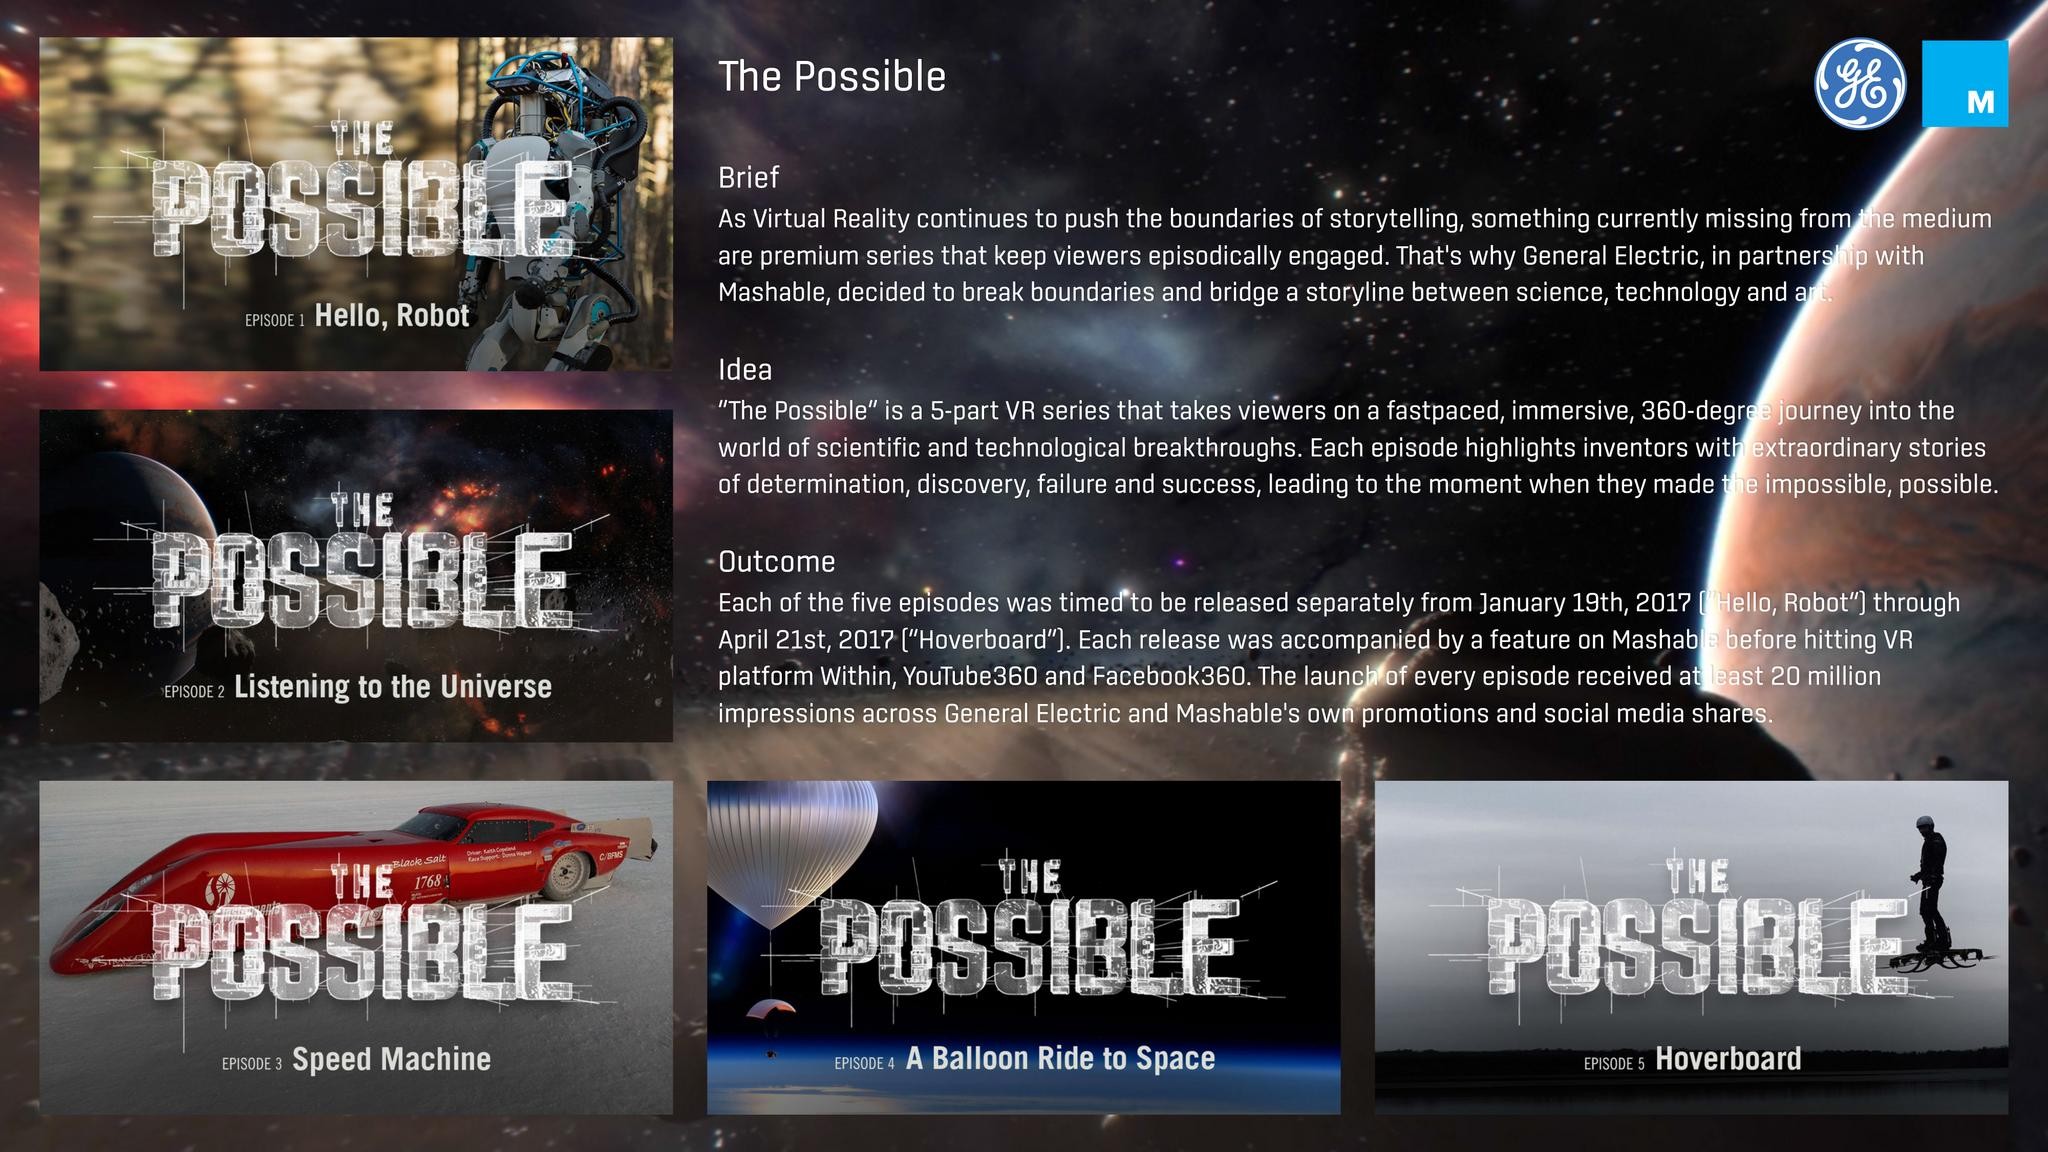 The Possible